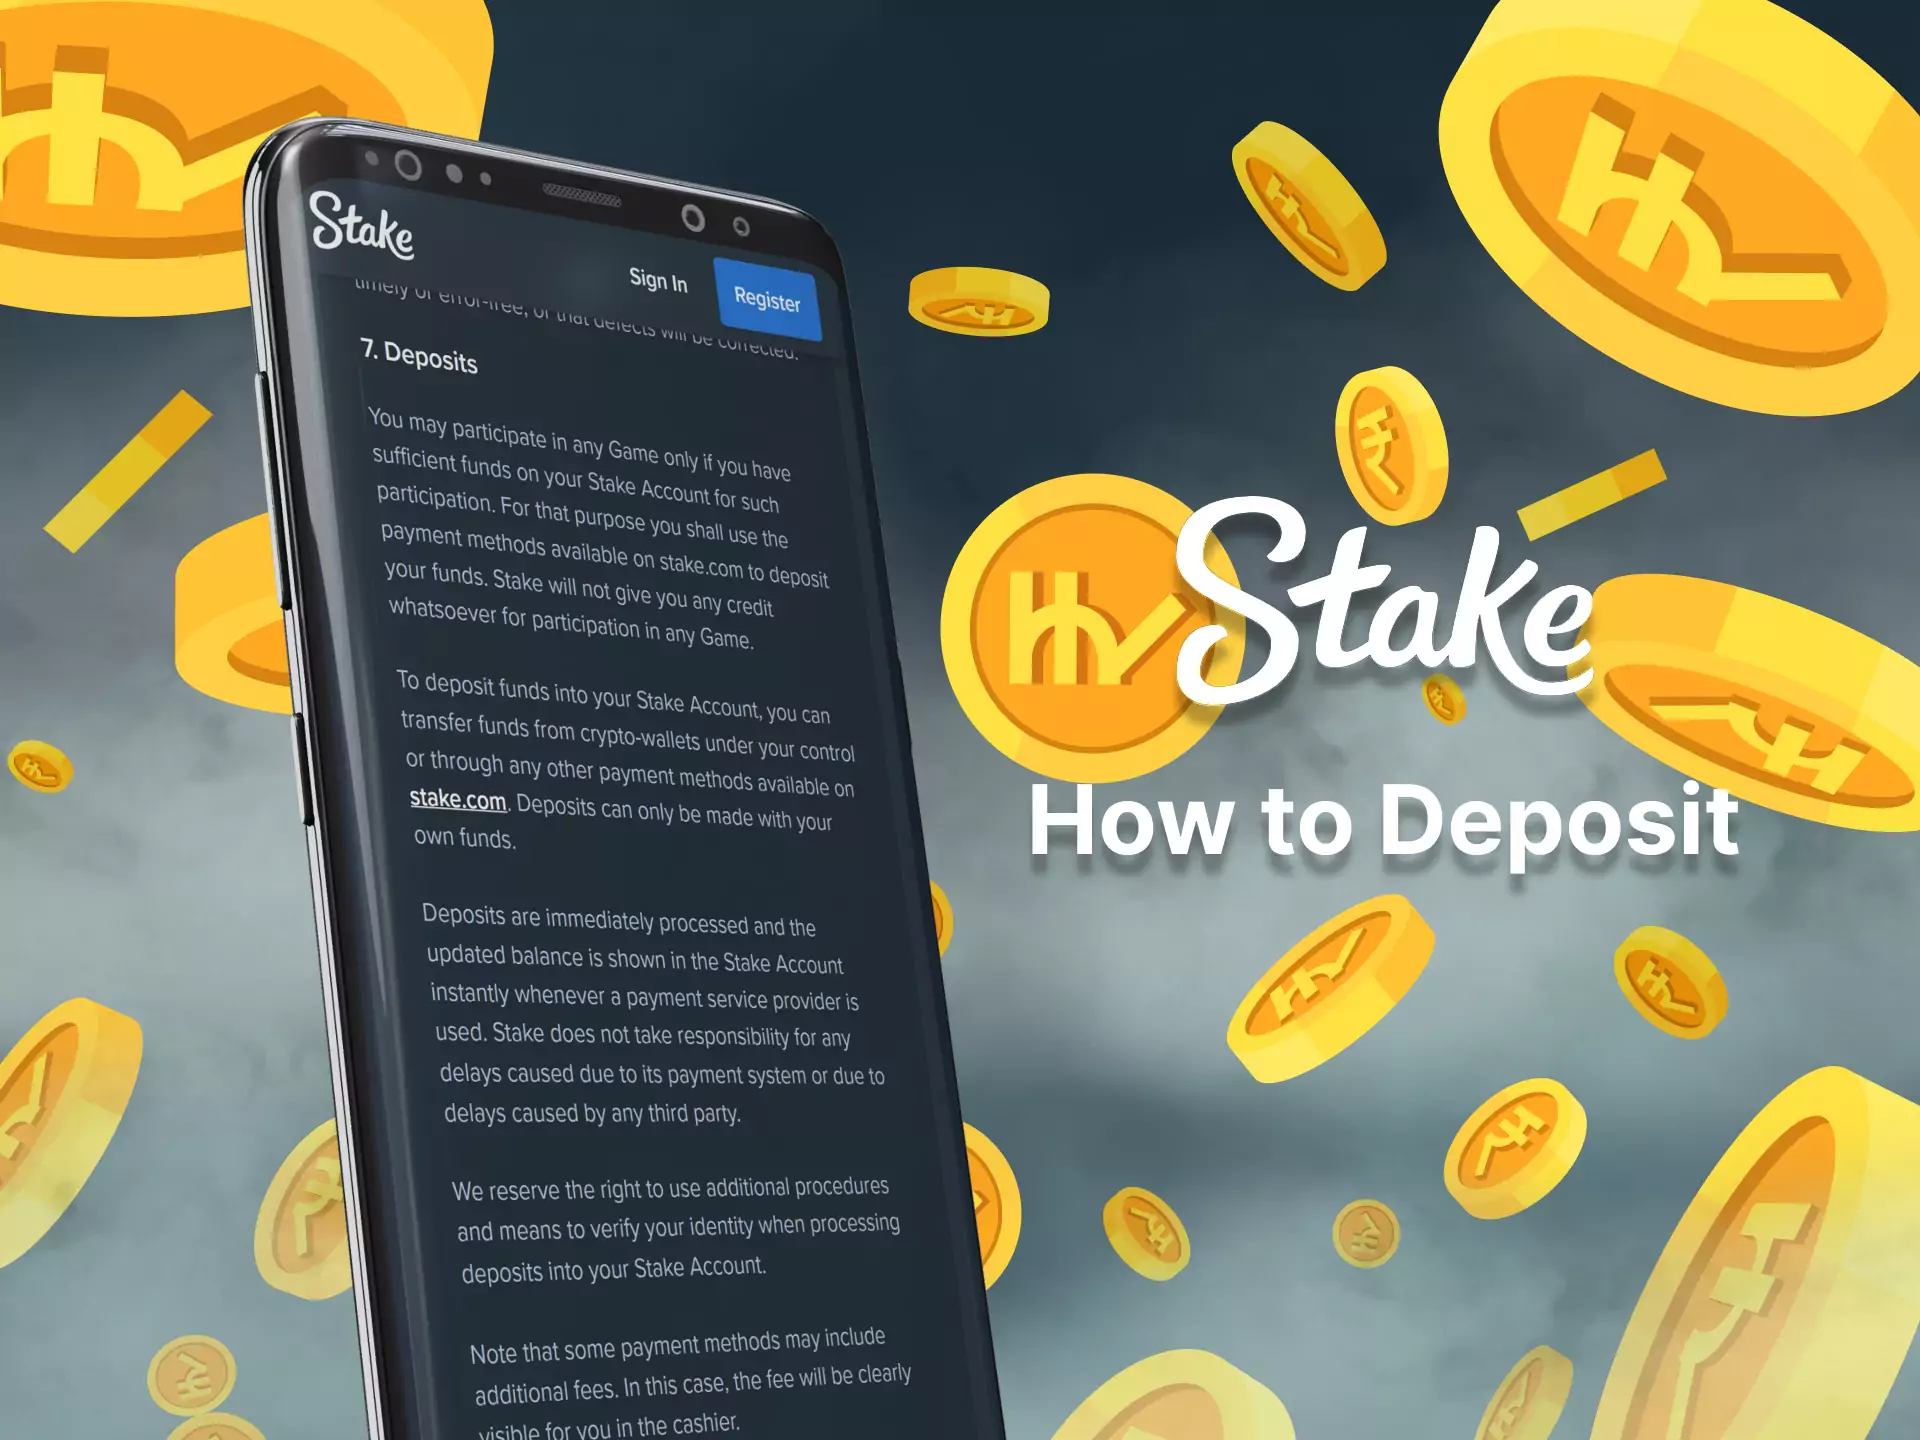 Use this instruction to top up your deposit Stake.com.